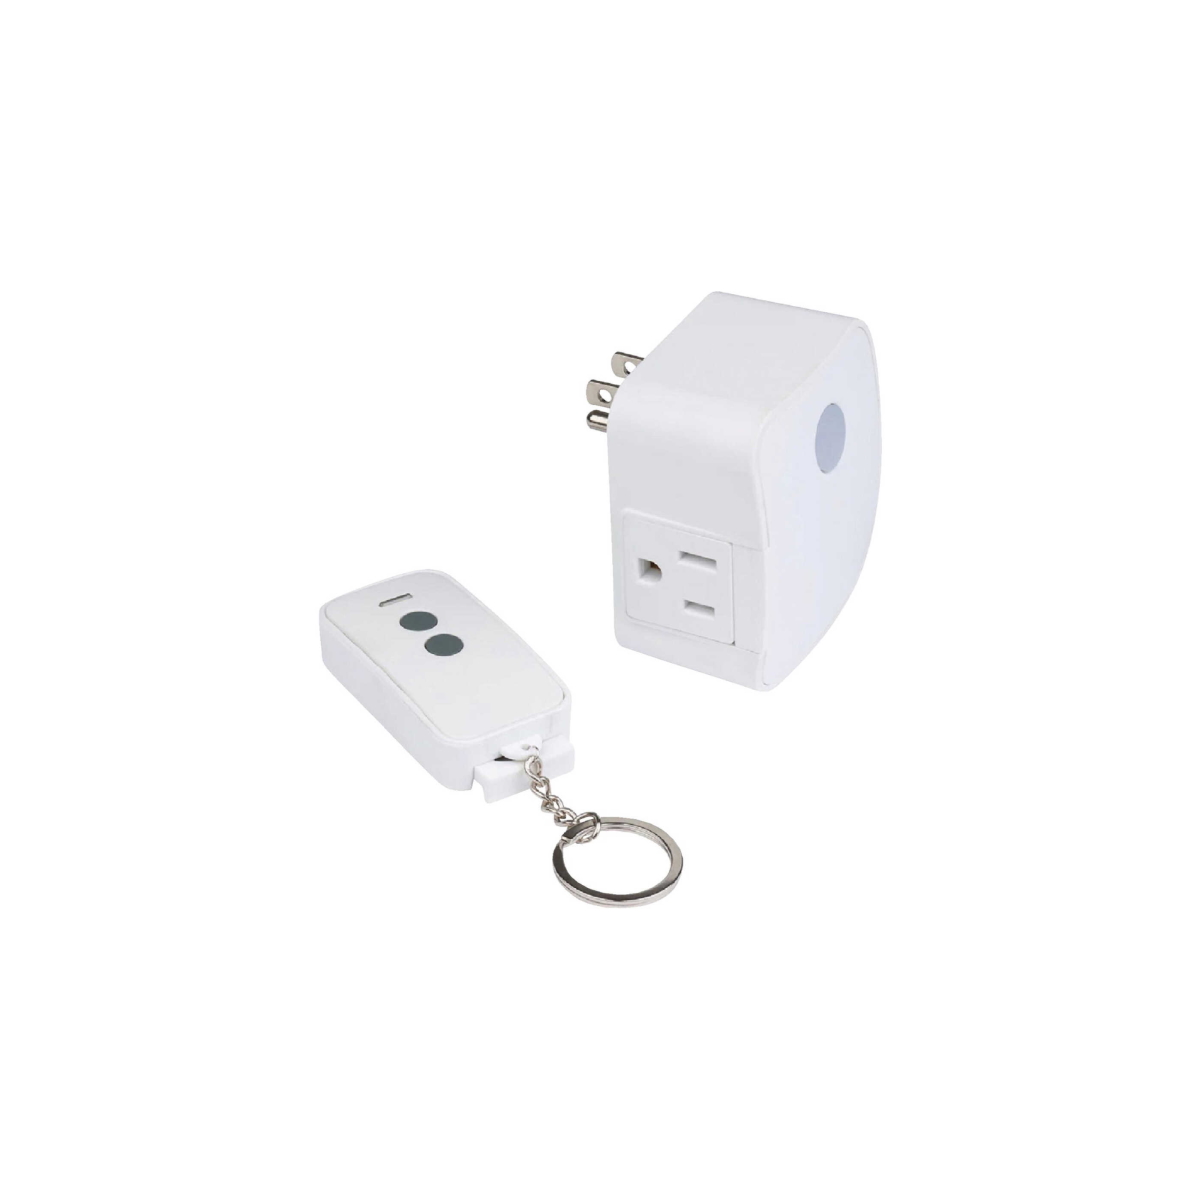 WESTEK Indoor Wireless Wall Outlet Switch with Remote Operation - Ideal for  Lamps and Household Appliances - the Easy Way to Add a Switched Outlet -  Signal Works Through Walls, Up To